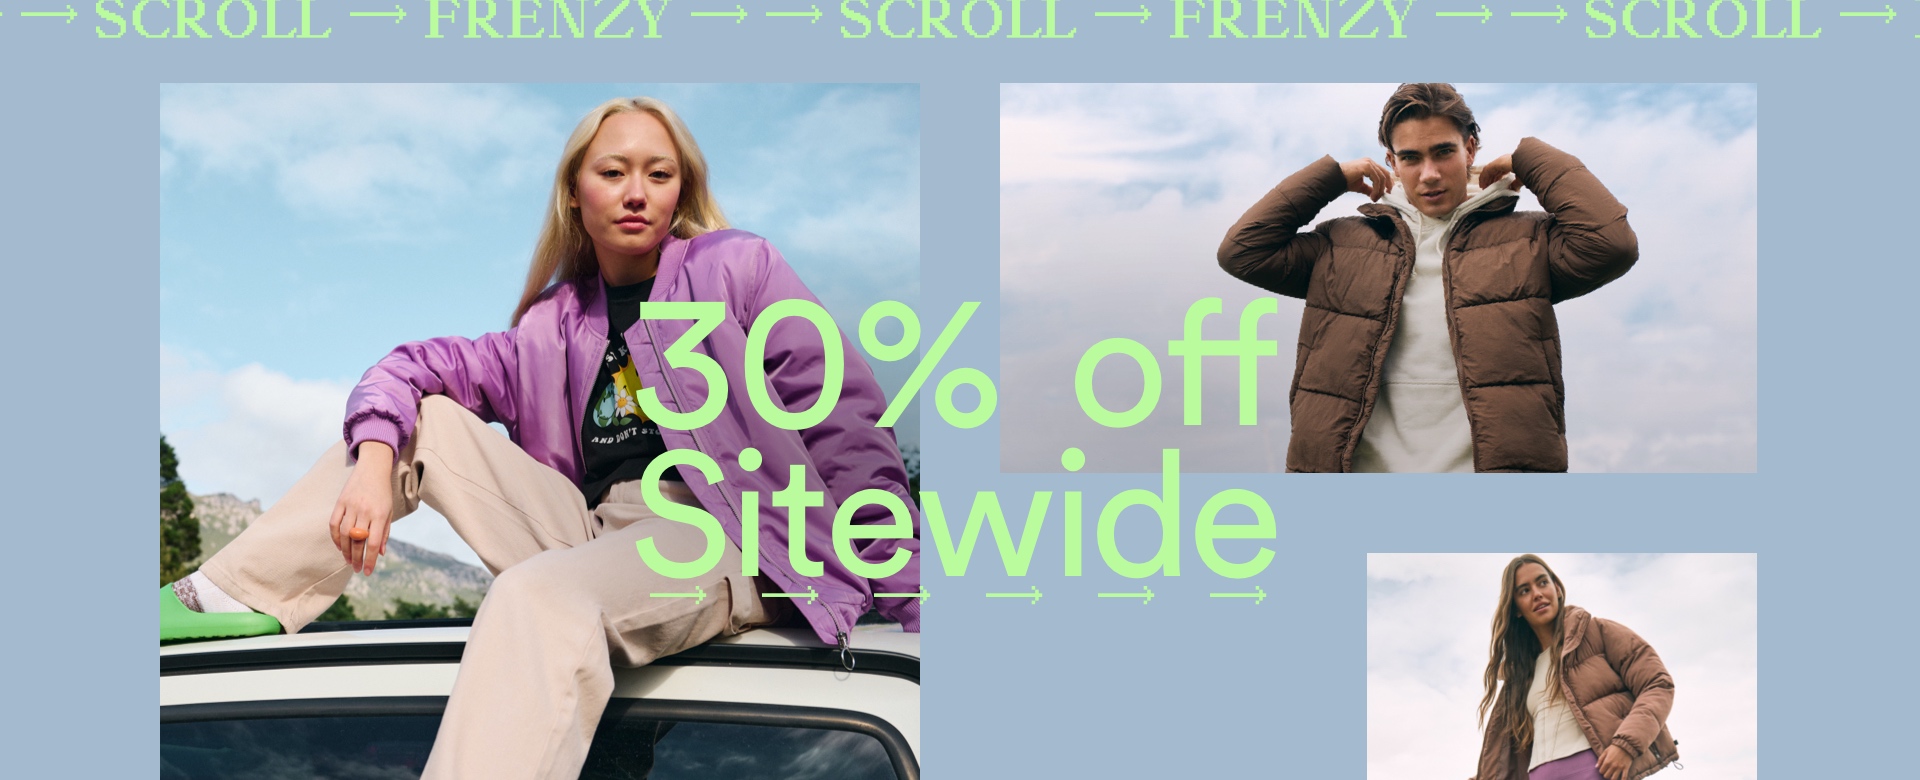 Scroll Frenzy. 30% Off Sitewide. Click To Shop Women's